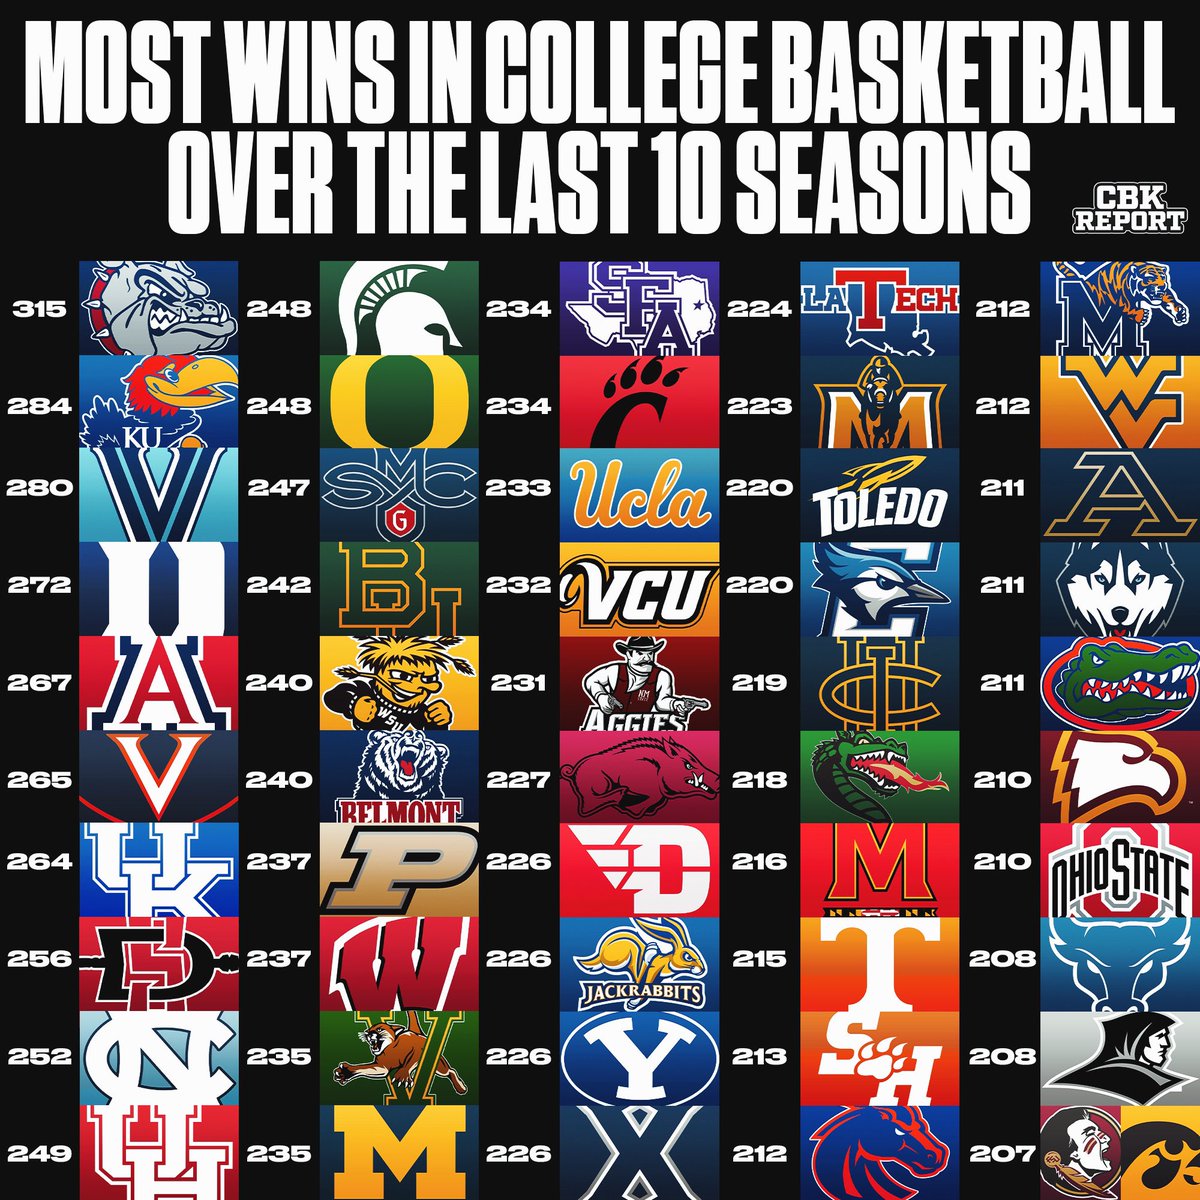 The most wins in College Basketball over the last 10 seasons🥇